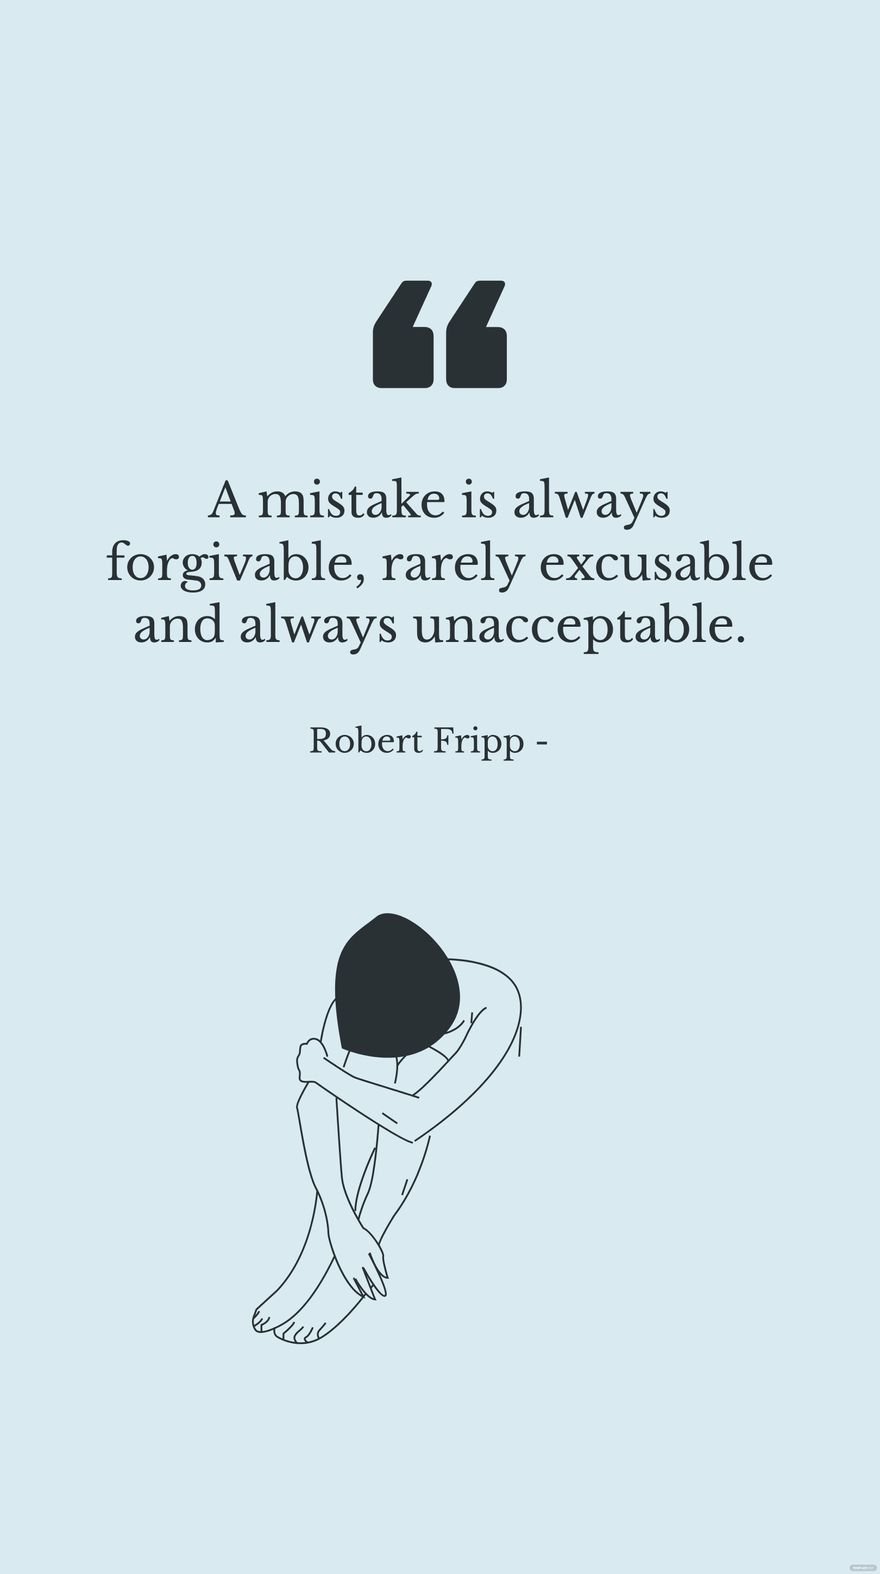 Robert Fripp - A mistake is always forgivable, rarely excusable and always unacceptable. in JPG